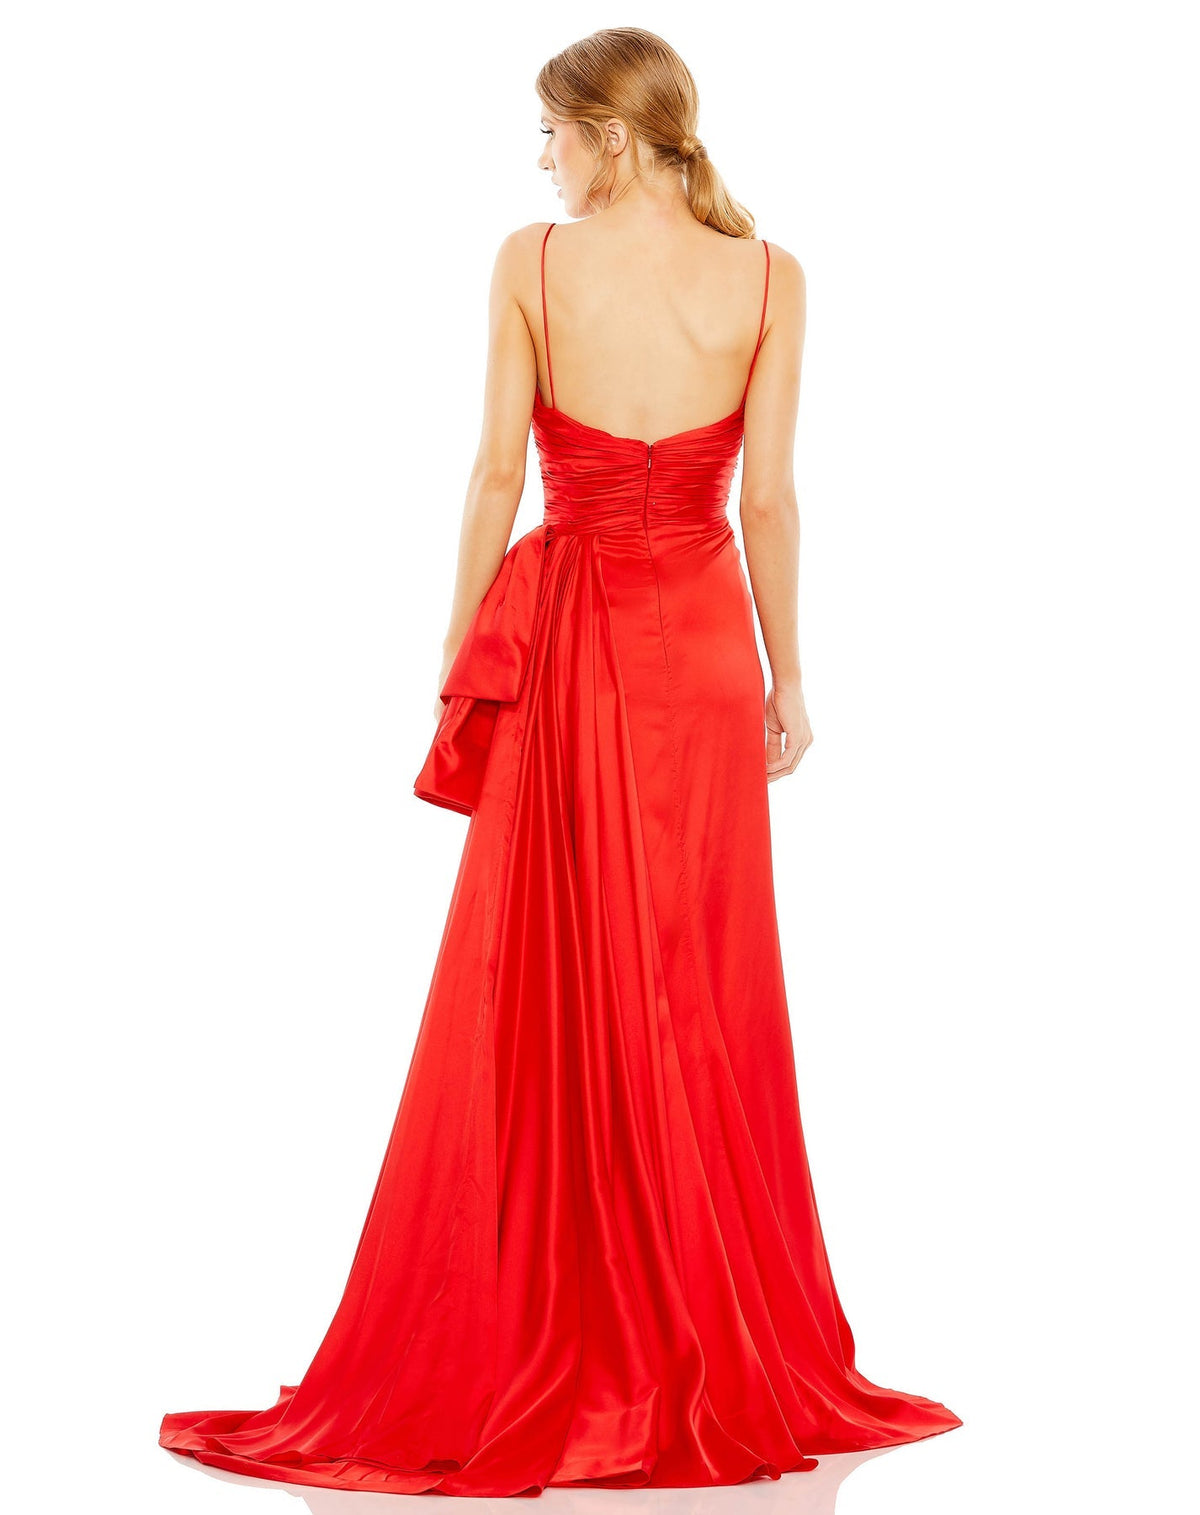 STRAPLESS CUT OUT SIDE BOW GOWN - RED mac duggal Style #68450 red